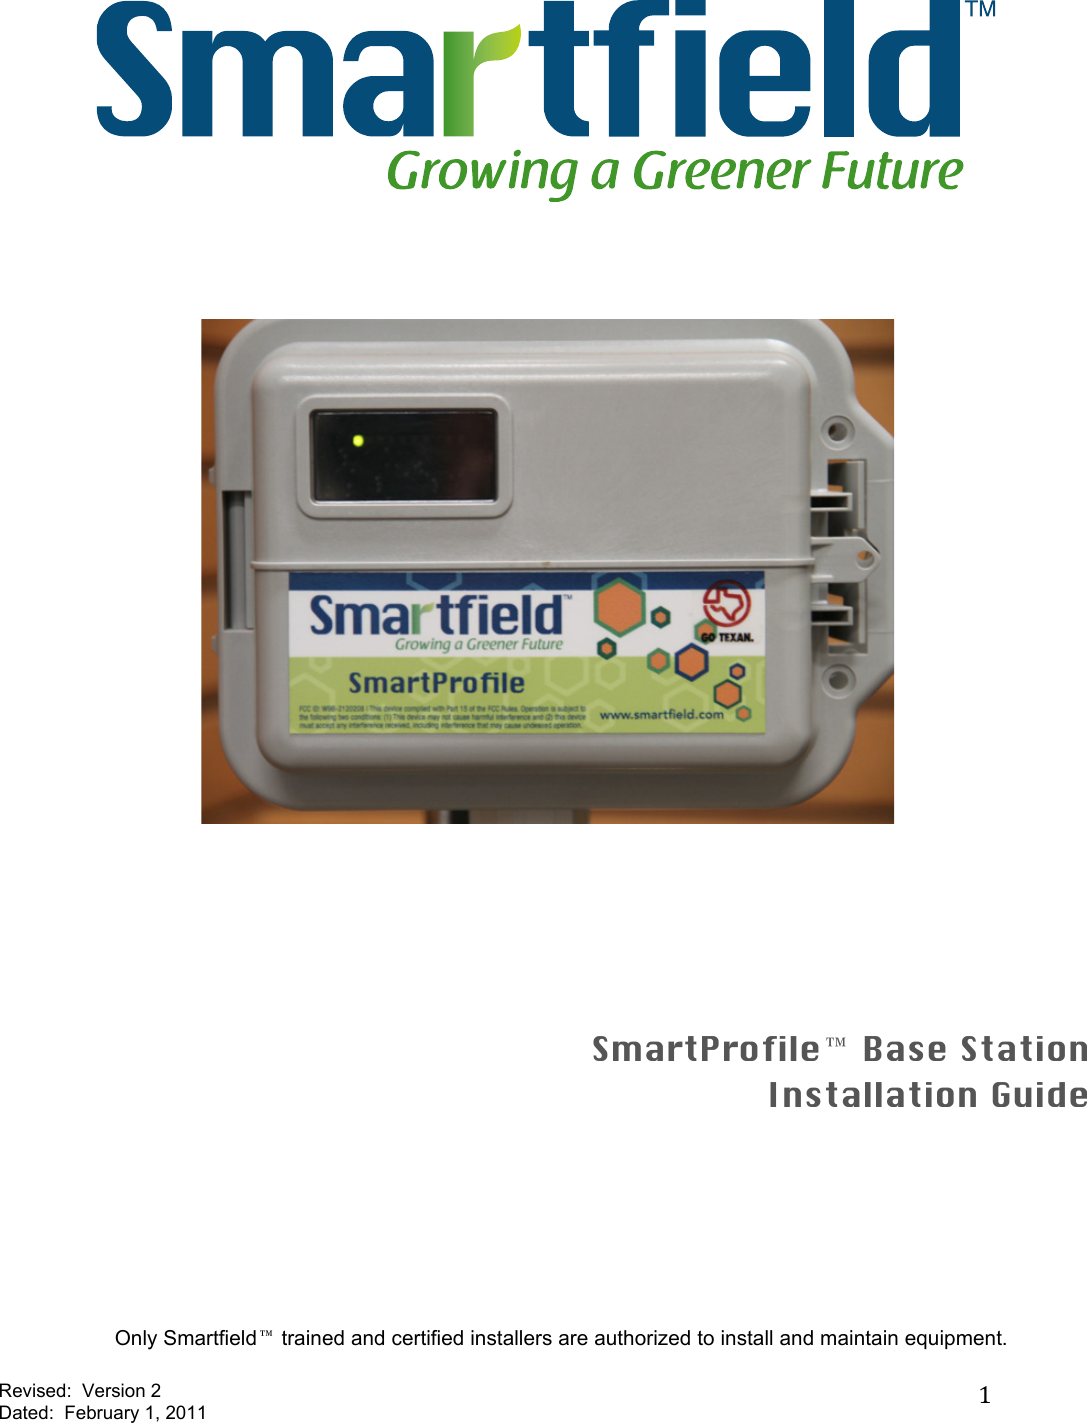 Revised:  Version 2 Dated:  February 1, 2011 !&quot;&quot;&quot;&quot;&quot;&quot;&quot;&quot;&quot;&quot;&quot;&quot;&quot;&quot;&quot;&quot;&quot;&quot;&quot;&quot;&quot;&quot;&quot;&quot;&quot; &quot;&quot;&quot;&quot;&quot;&quot;&quot;&quot;&quot;&quot;&quot;&quot;&quot;&quot;&quot;&quot;&quot;&quot;&quot;&quot;&quot;&quot;&quot;&quot;&quot;&quot;&quot;&quot;&quot;&quot;&quot;&quot;&quot;&quot;&quot;&quot;&quot;&quot;&quot;&quot;&quot;SmartProfile Base Station Installation Guide   Only Smartfield trained and certified installers are authorized to install and maintain equipment. &quot;